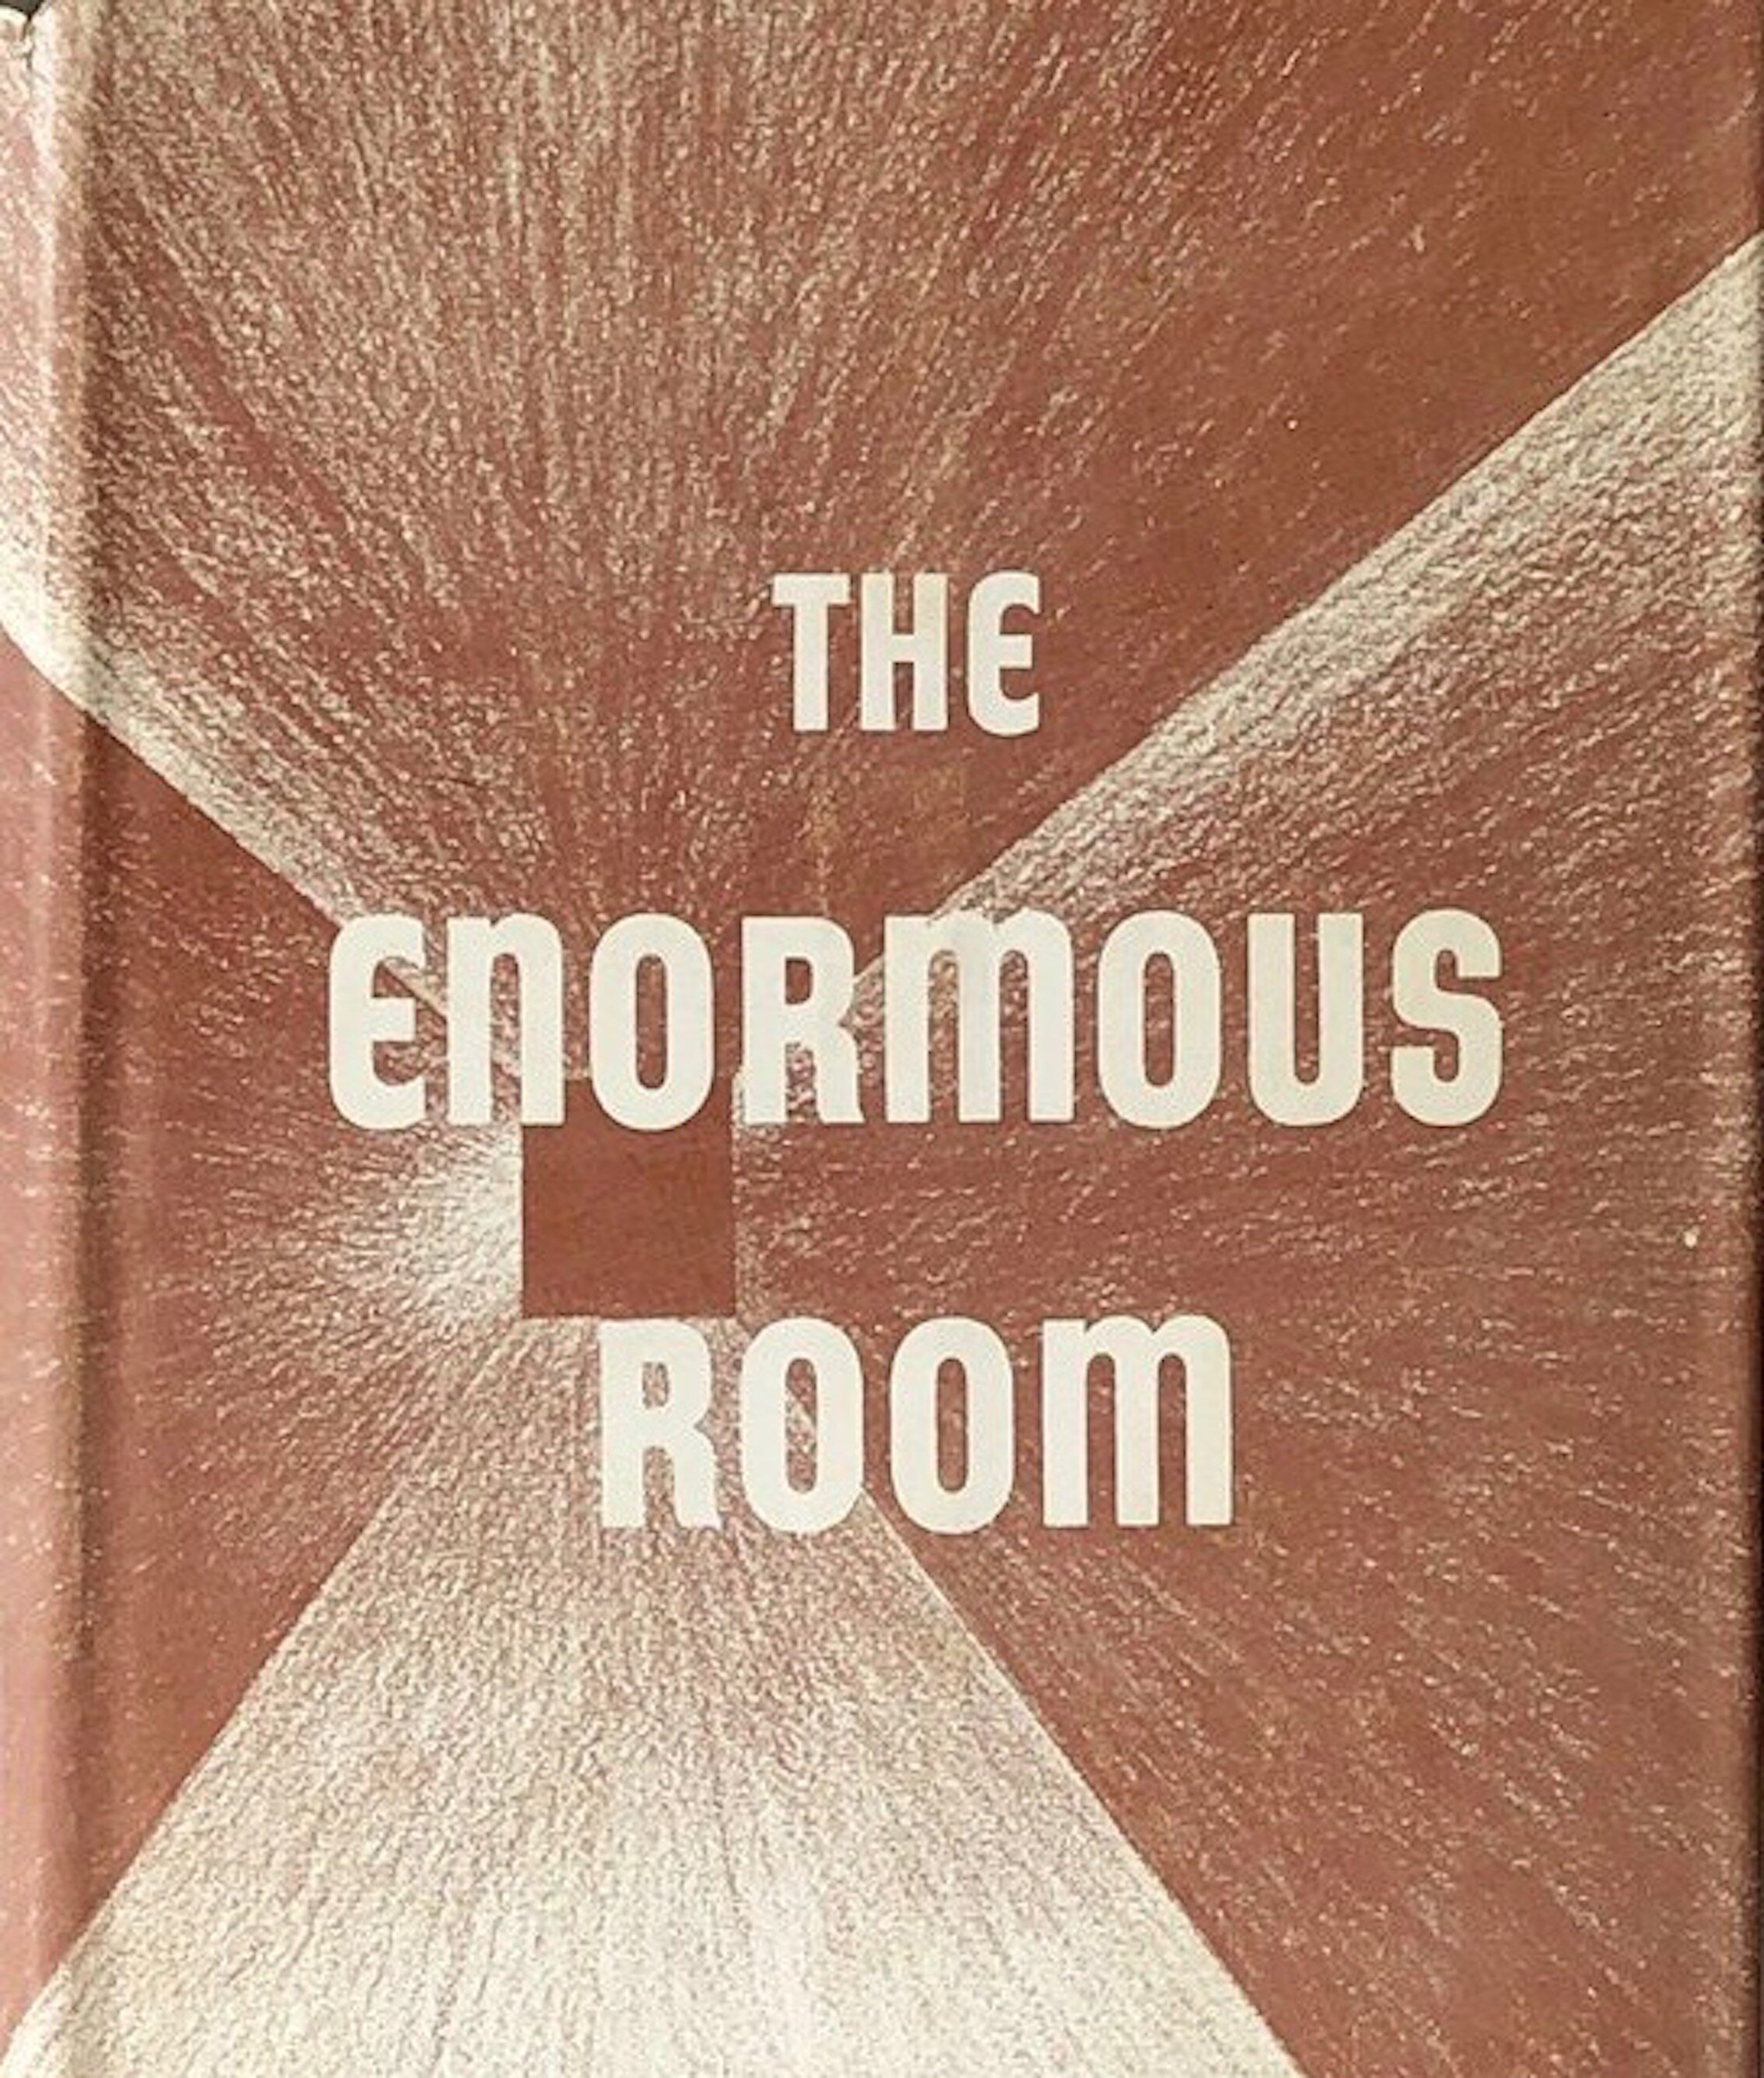 The Enormous Room — Revolution of Tenderness